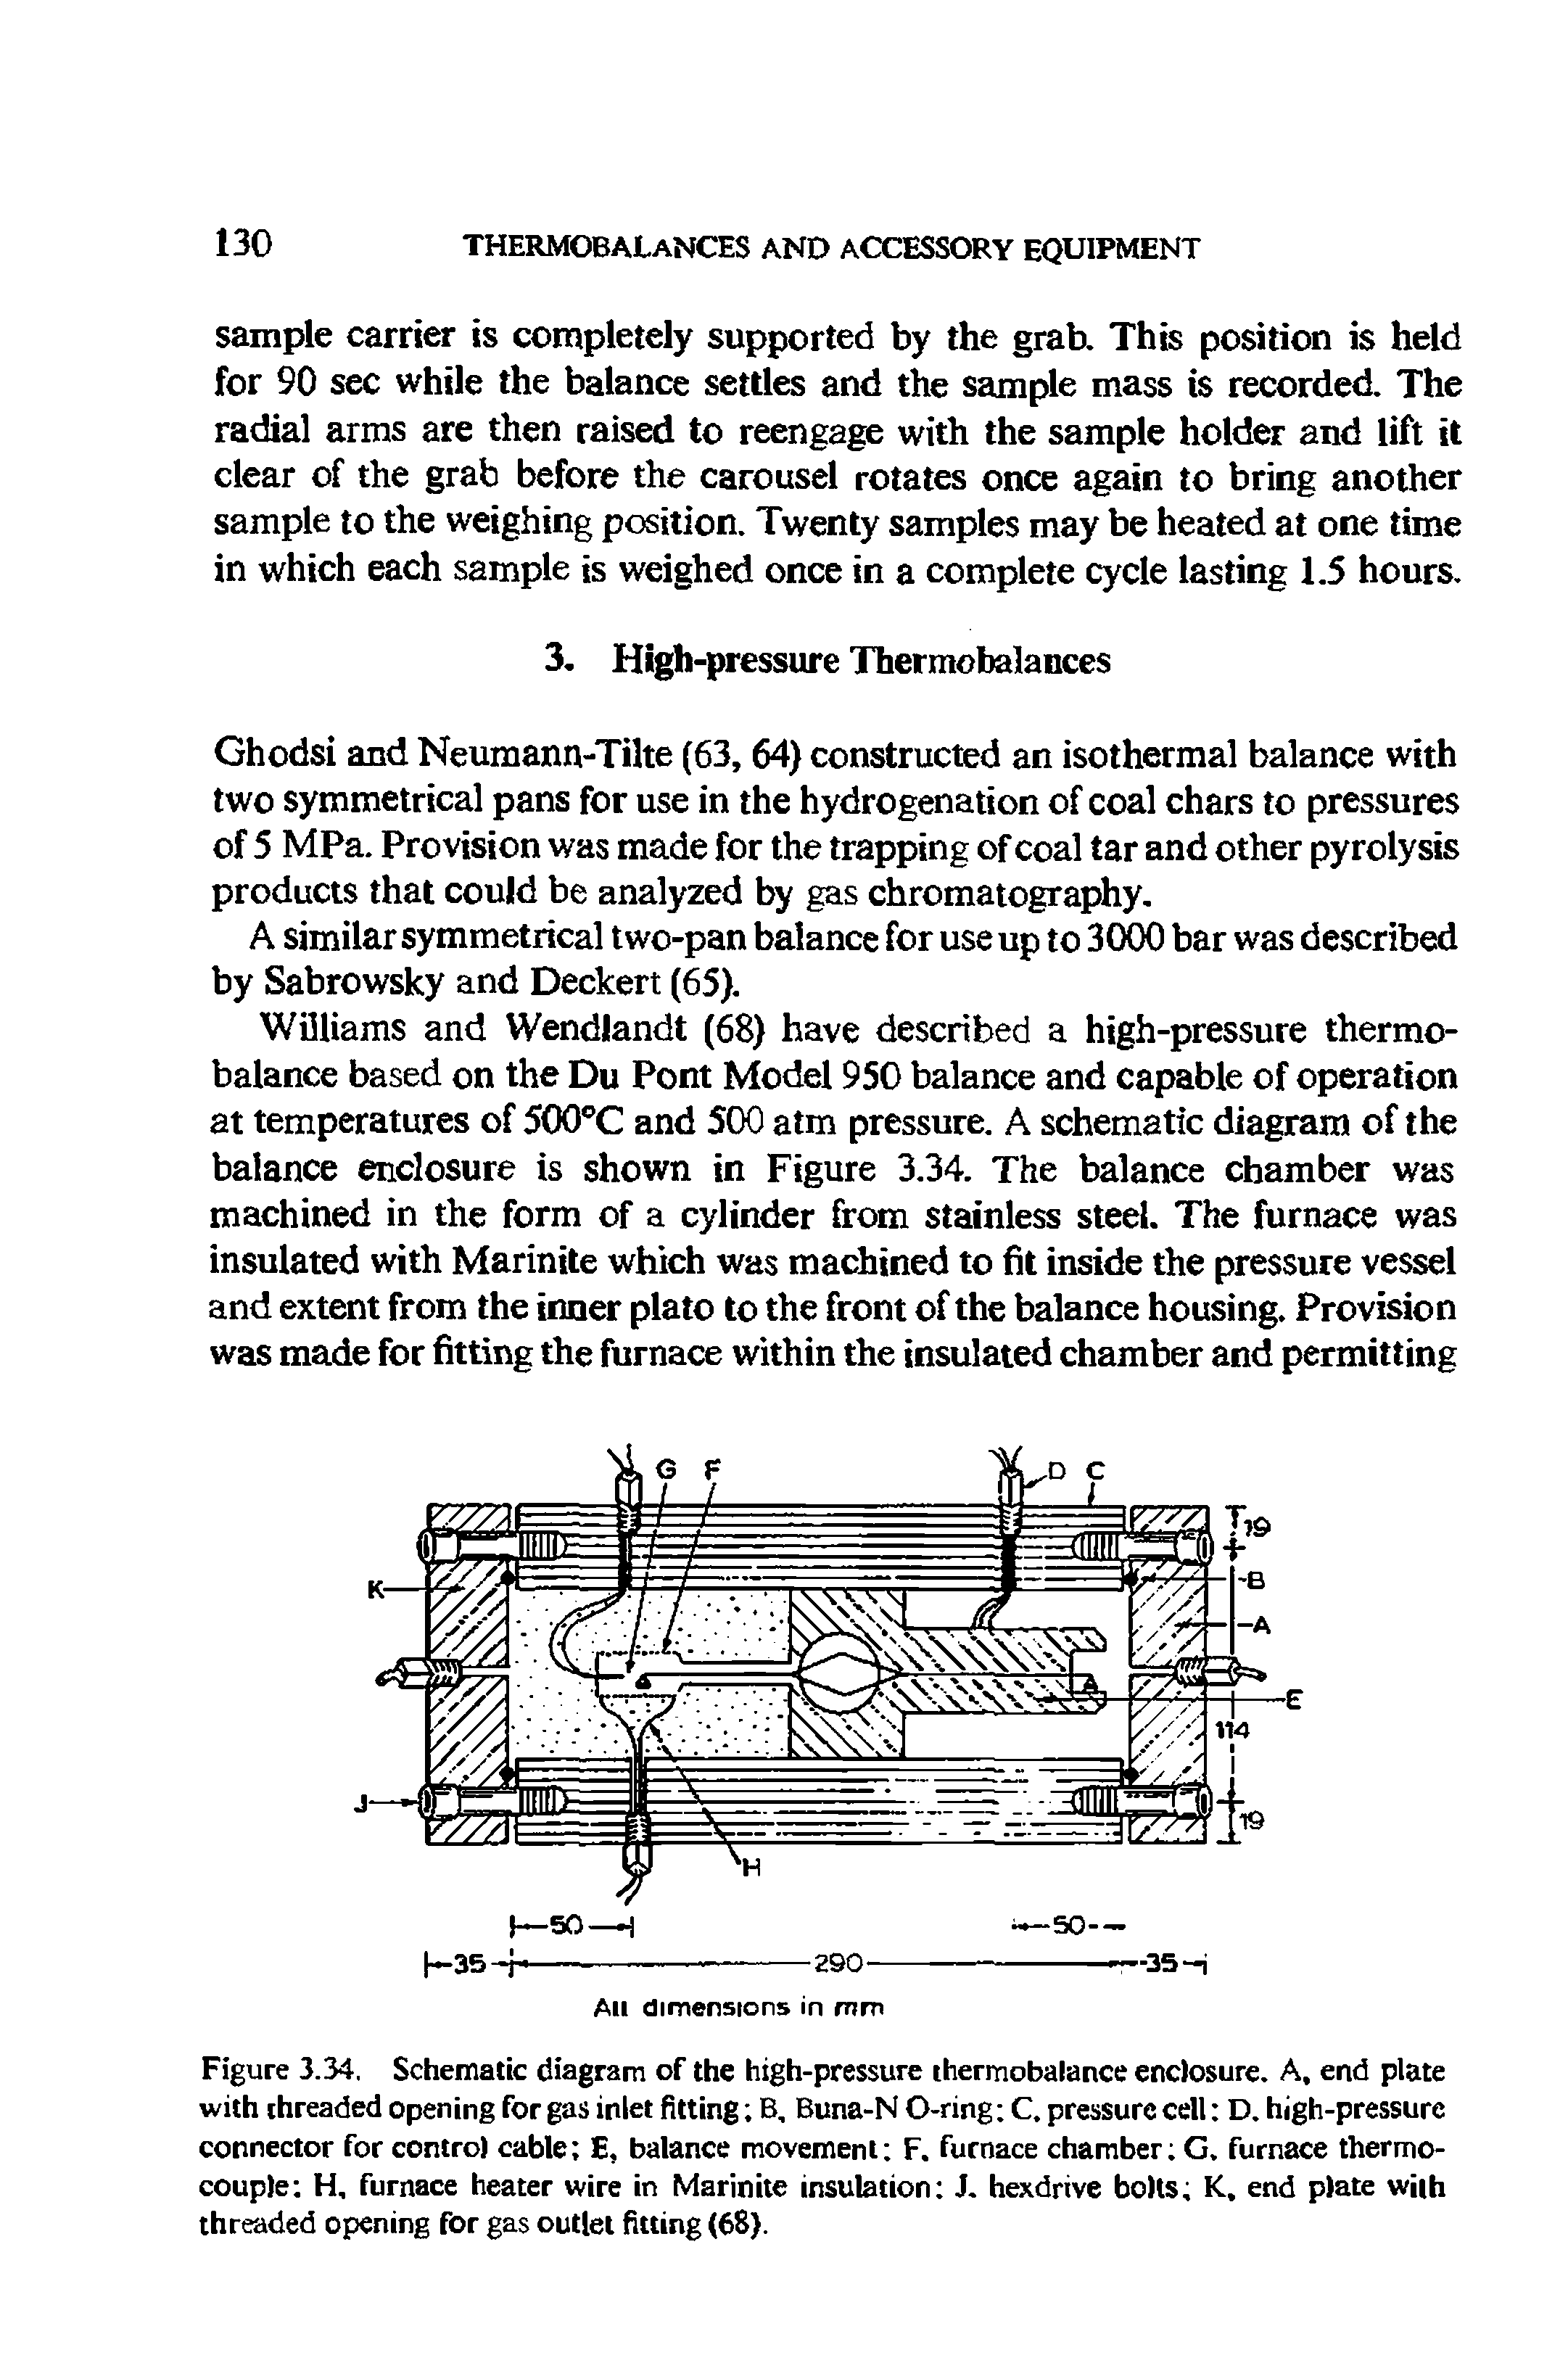 Figure 3.34. Schematic diagram of the high-pressure thermobalance enclosure. A, end plate with threaded opening for gas inlet fitting B, Buna-N O-ring C. pressure cell D. high-pressure connector for control cable E, balance movement F. furnace chamber G. furnace thermocouple H, furnace heater wire in Marinite insulation J. hexdrive bolts K, end plate with threaded opening for gas outlet fitting (68).